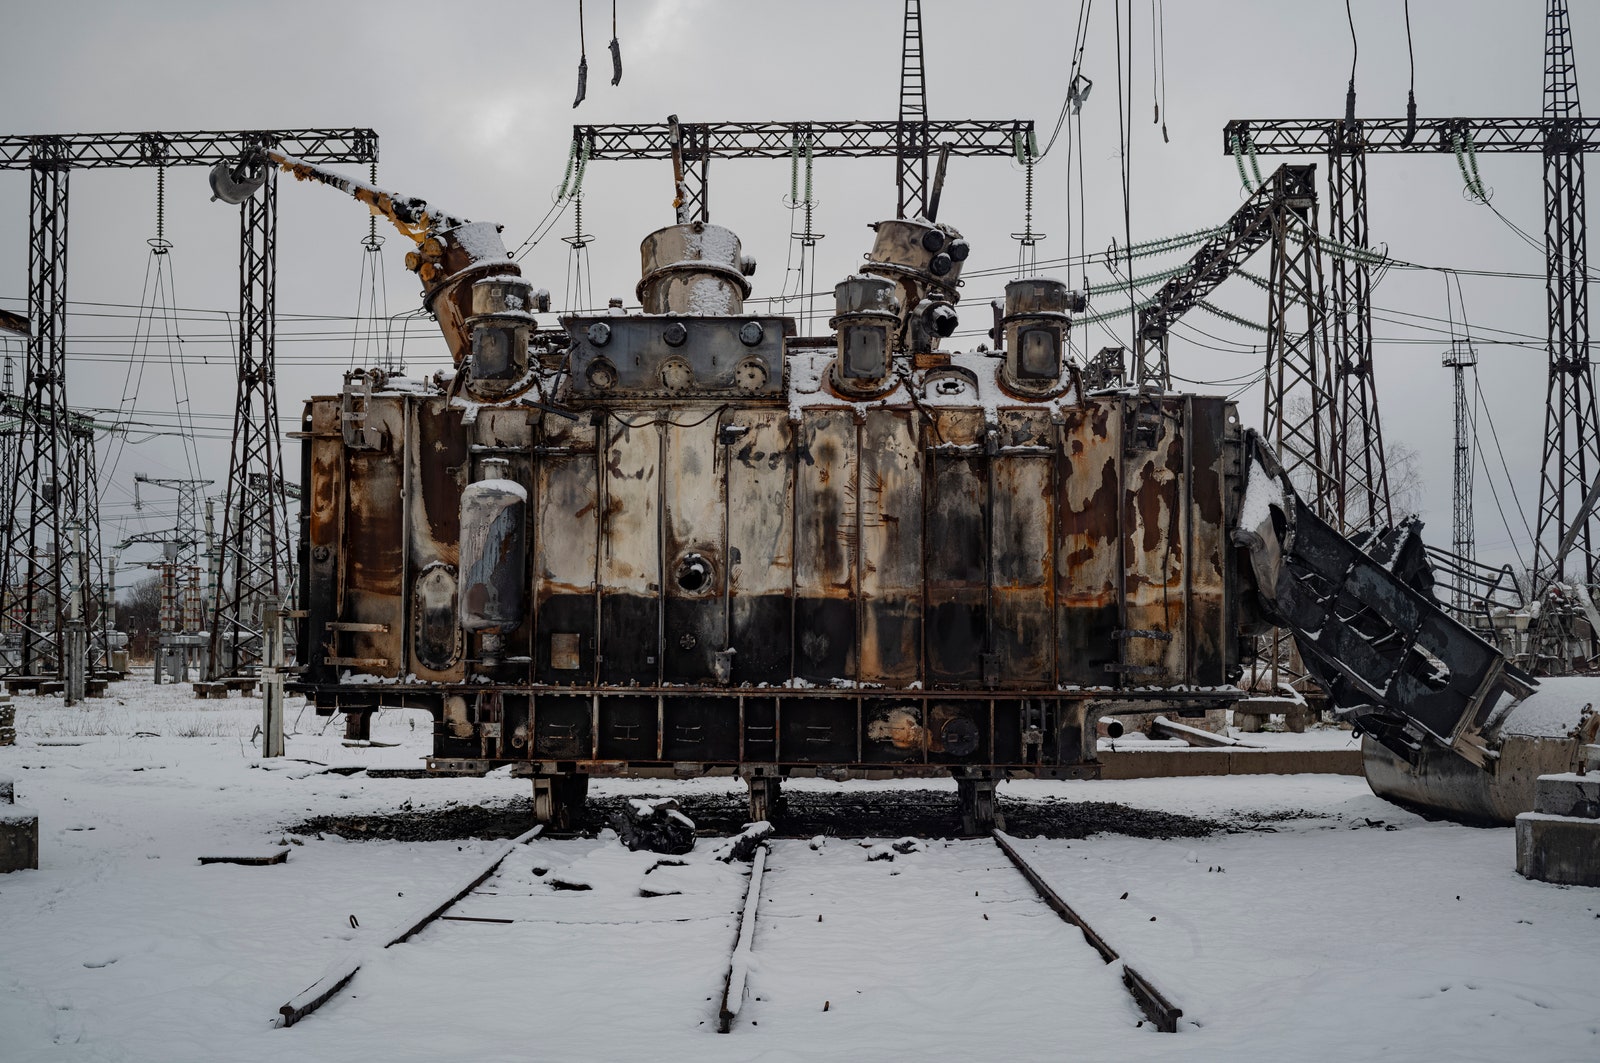 Part of a highvoltage transformer covered in snow.